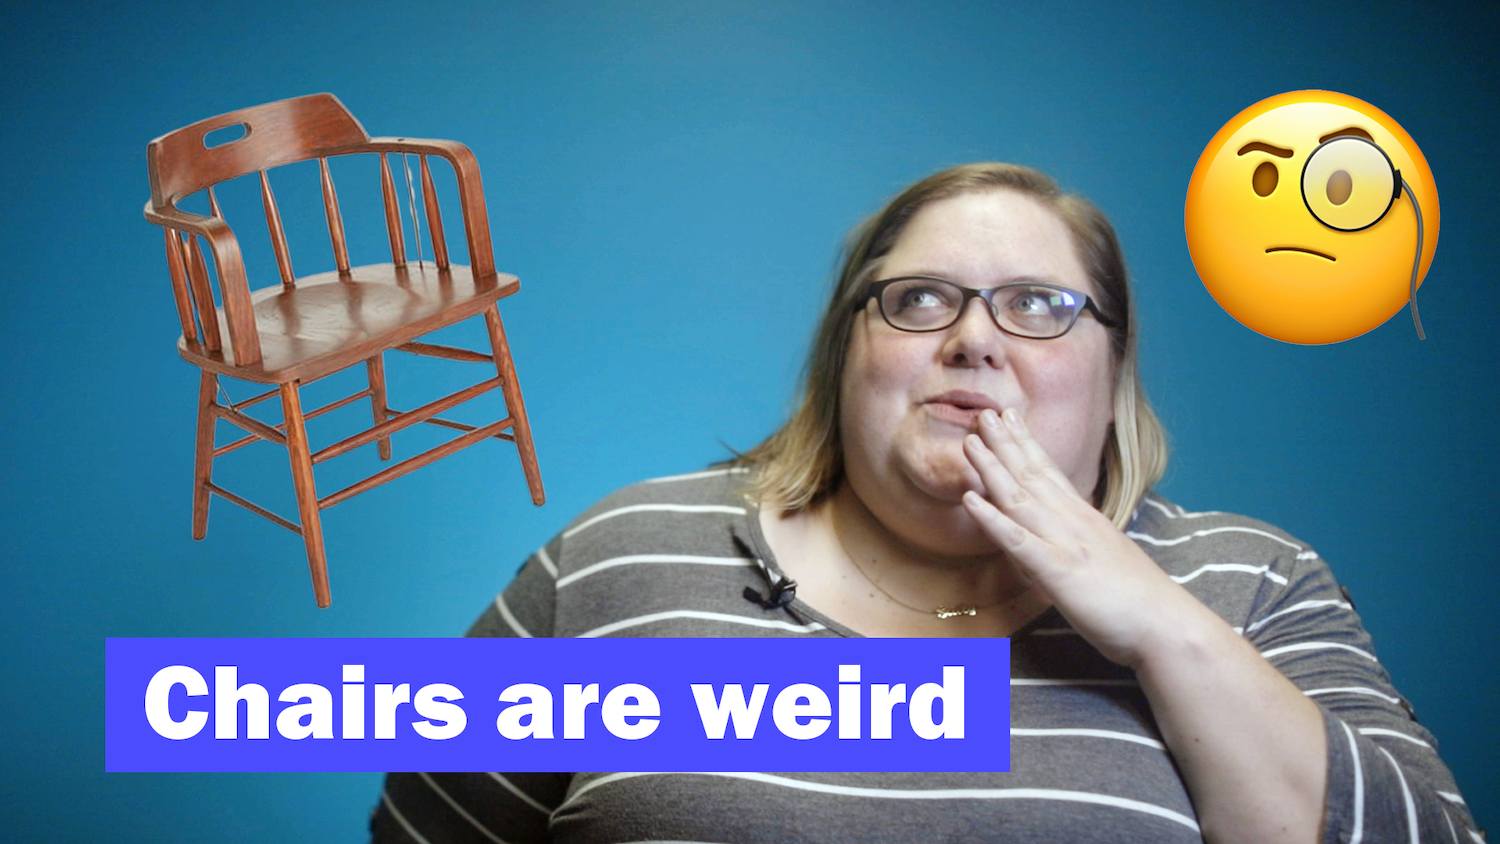 [WATCH & SHARE] Experts Explain How to Pick Seating Plus Size People Love